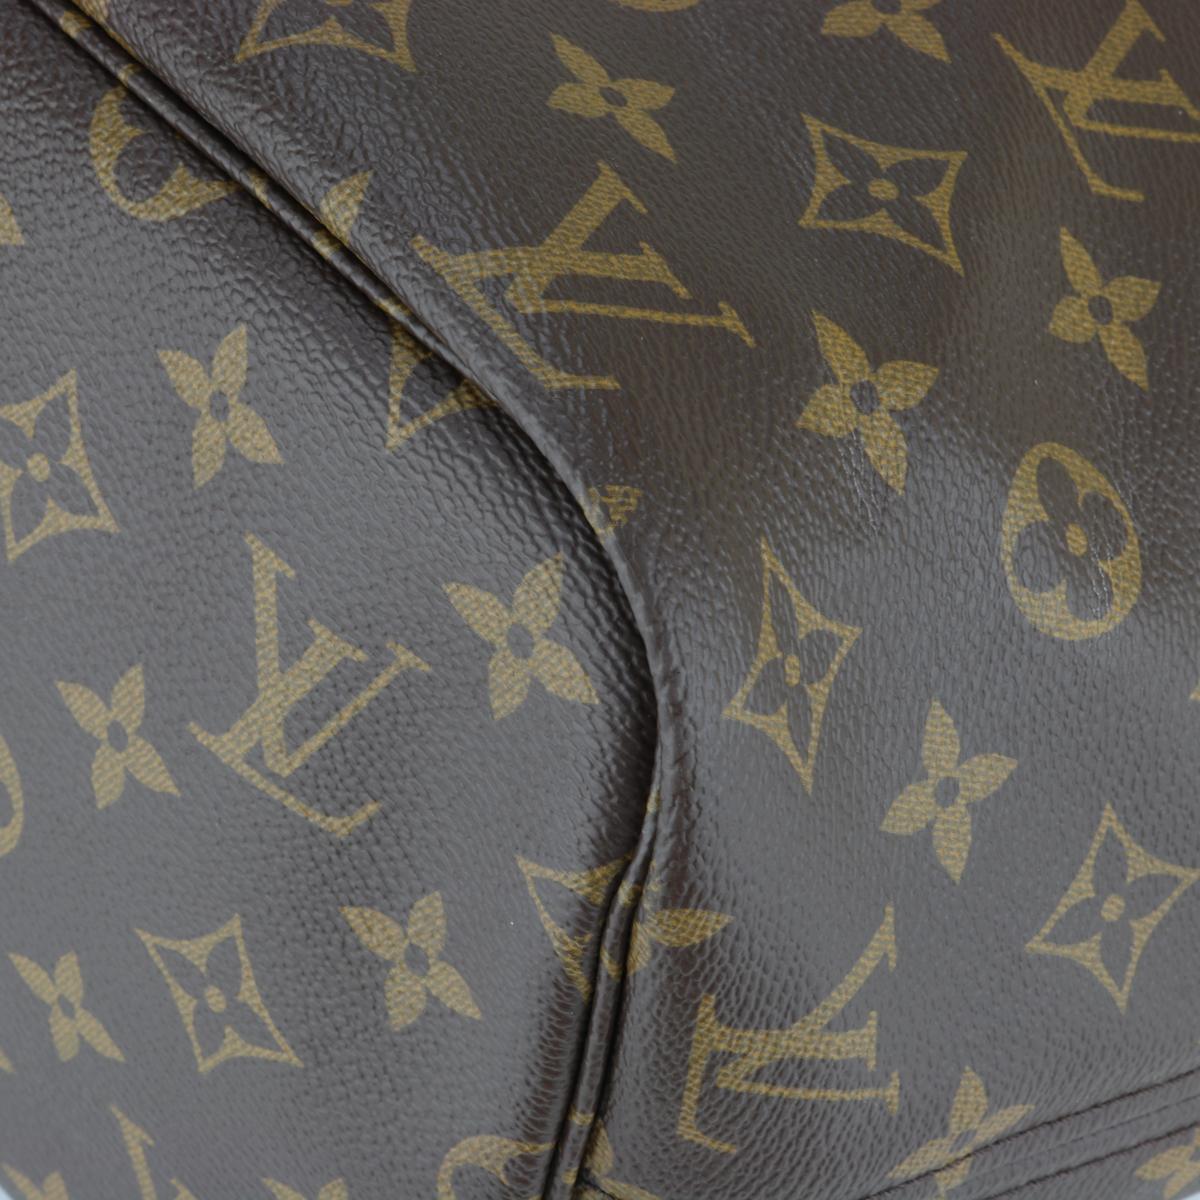 Louis Vuitton Neverfull MM Bag in Monogram with Beige Interior 2016 1